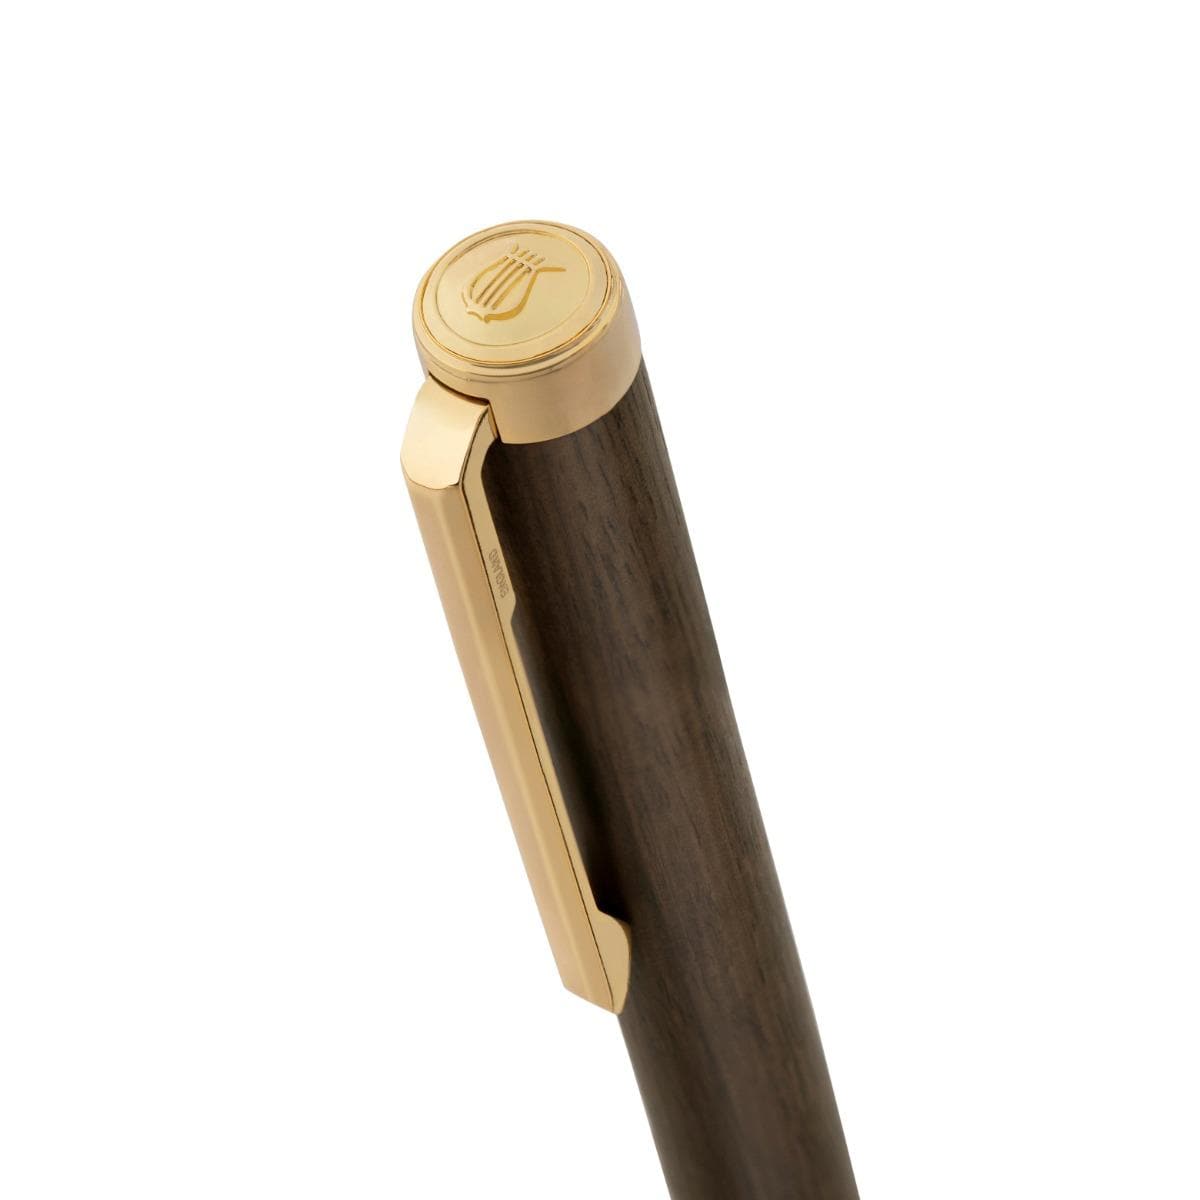 LAPIS BARD Contemporary Torque Hickory Ballpoint Pen - Brown with Gold Trims WP33015 - Kamal Watch Company